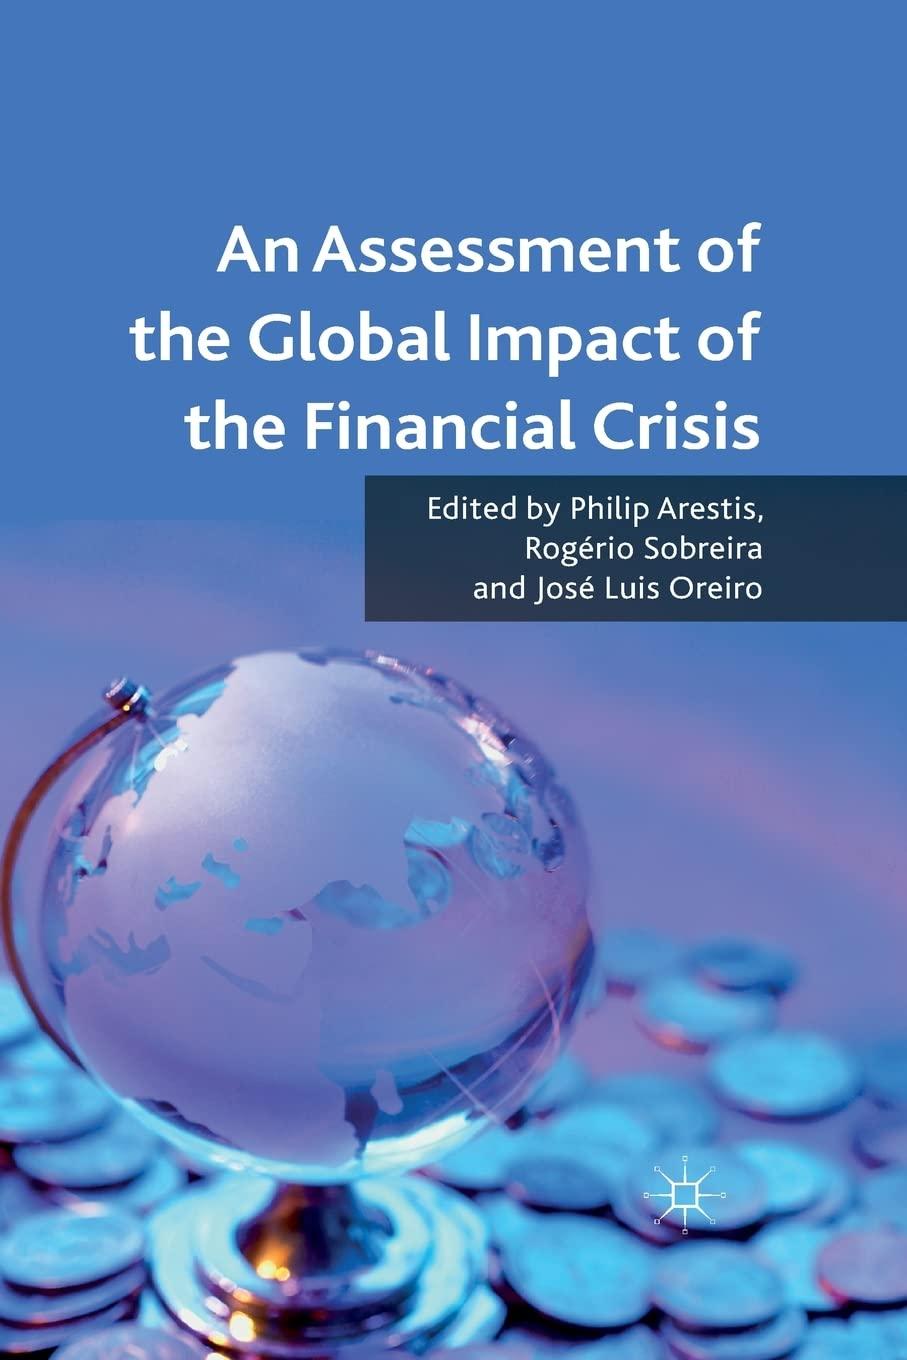 an assessment of the global impact of the financial crisis 1st edition p. arestis, r. sobreira, josé luis